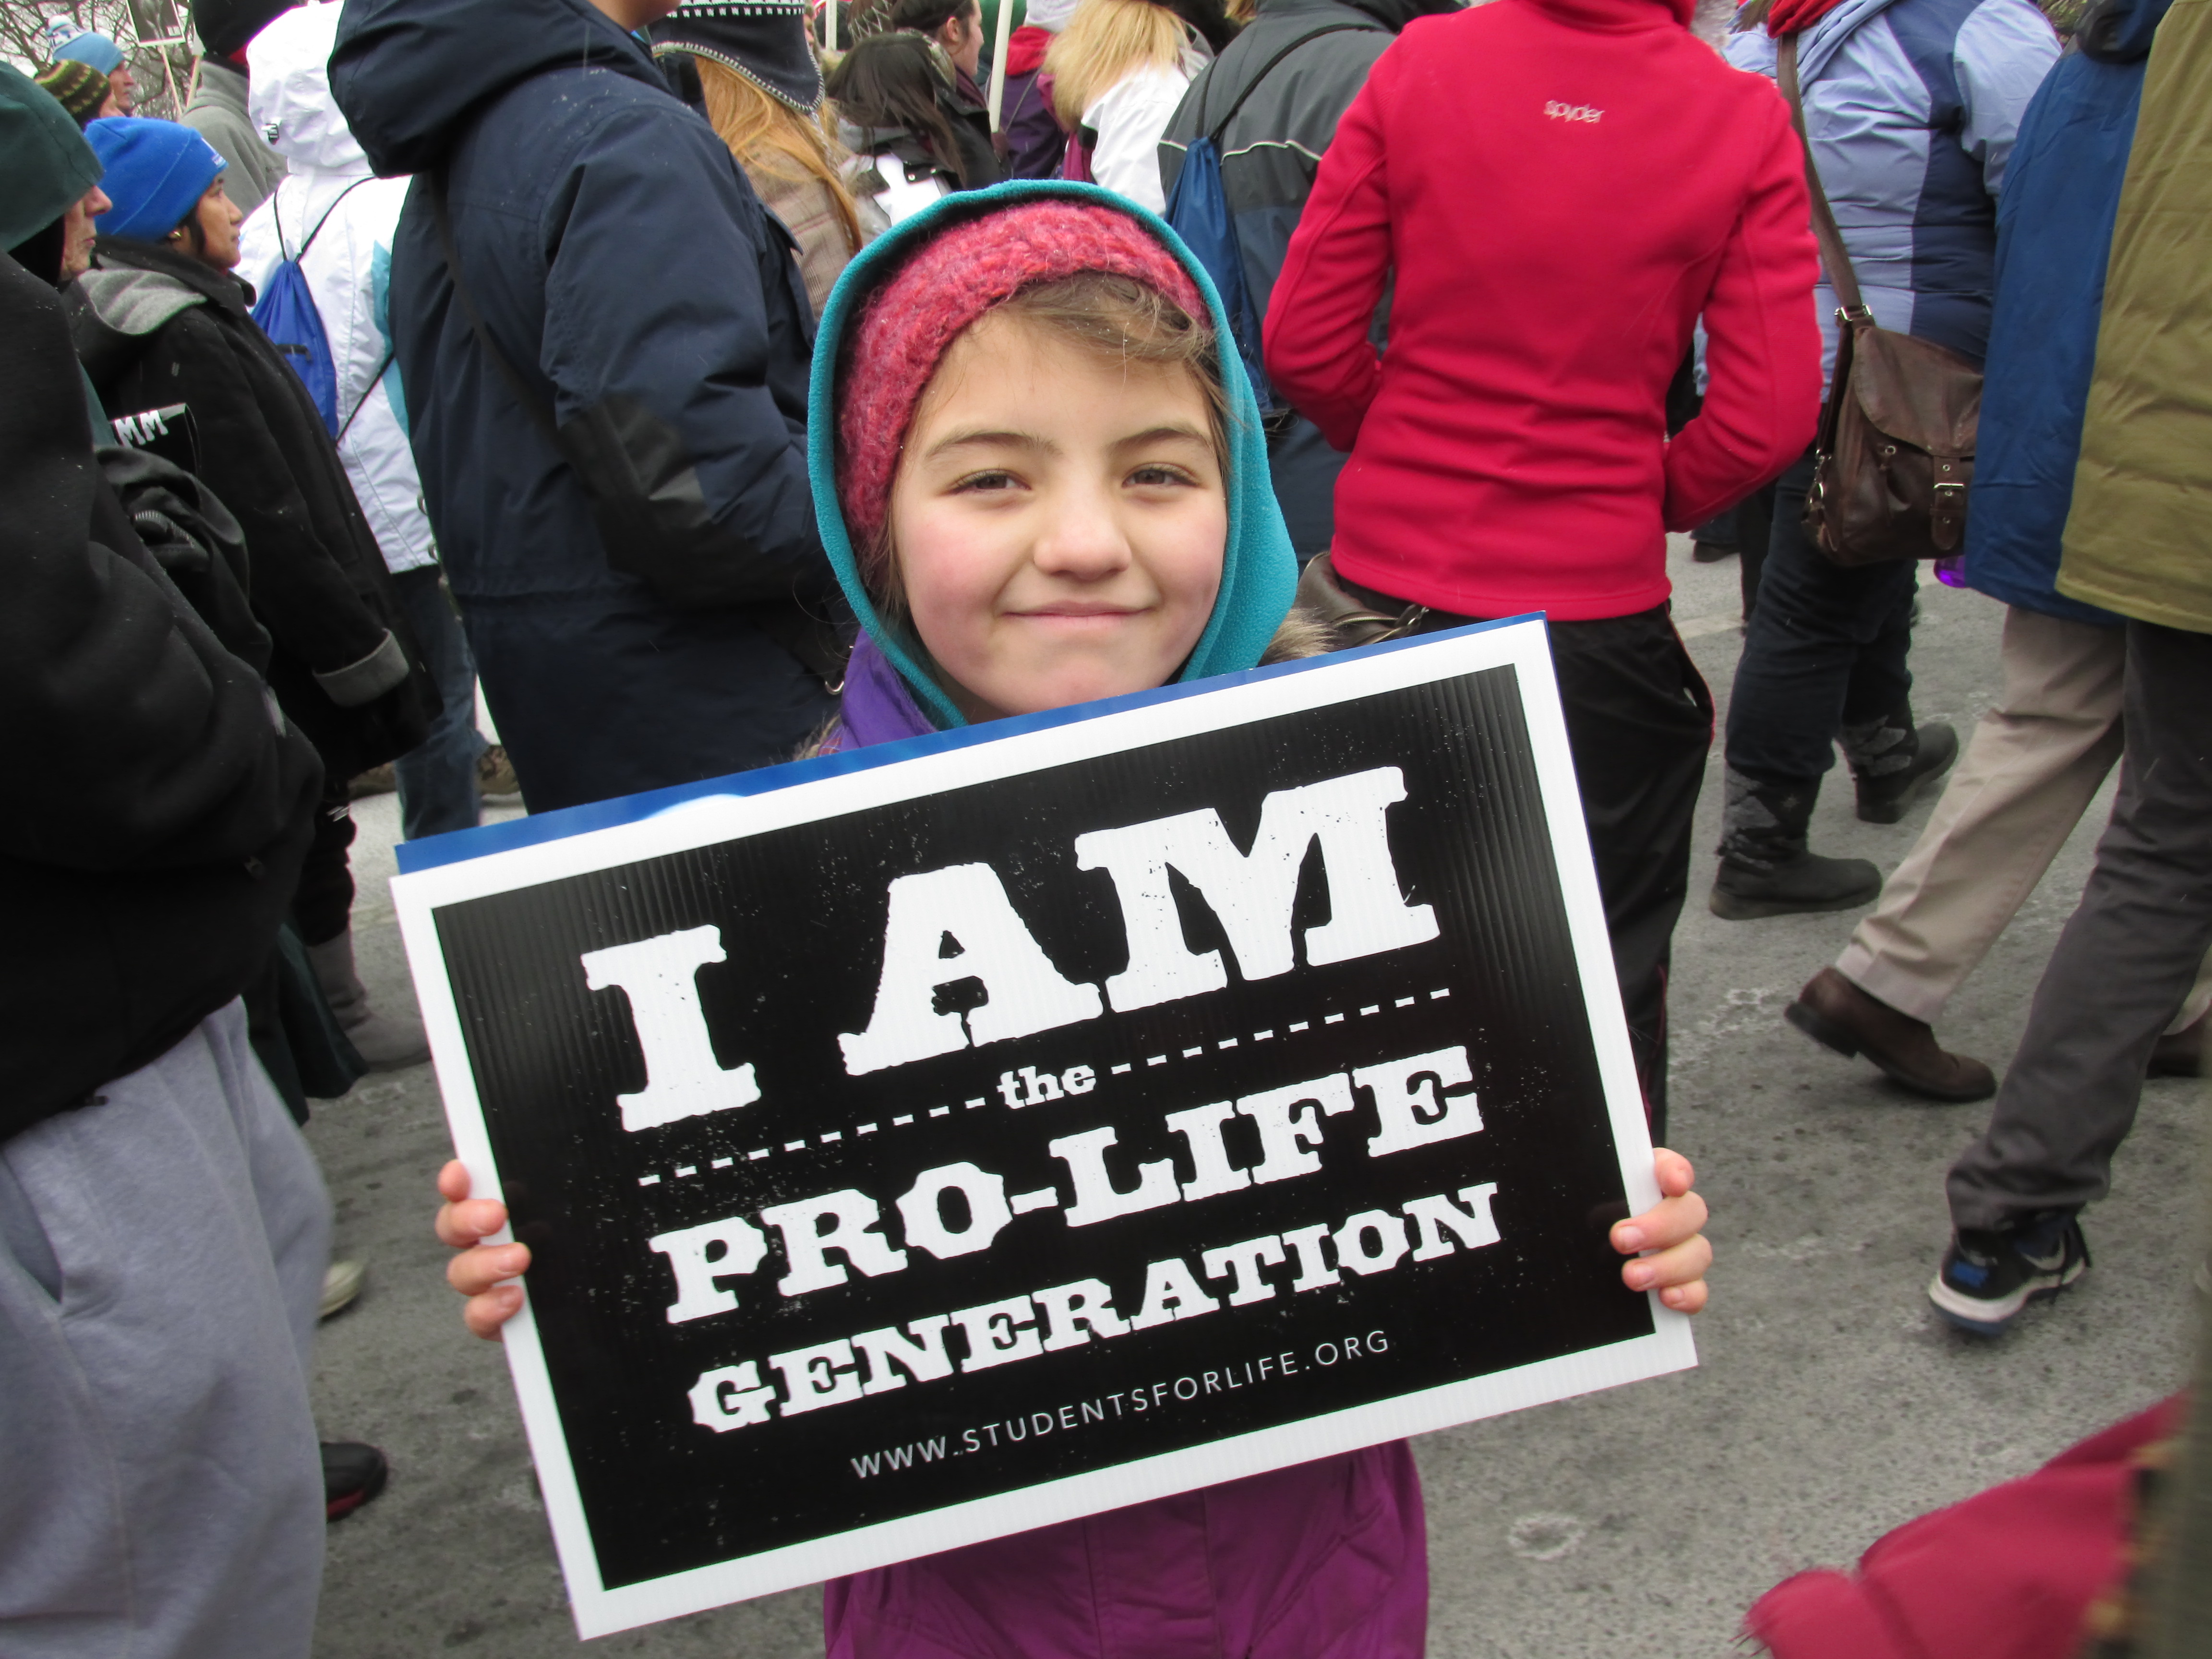 March for Life in Washington DC